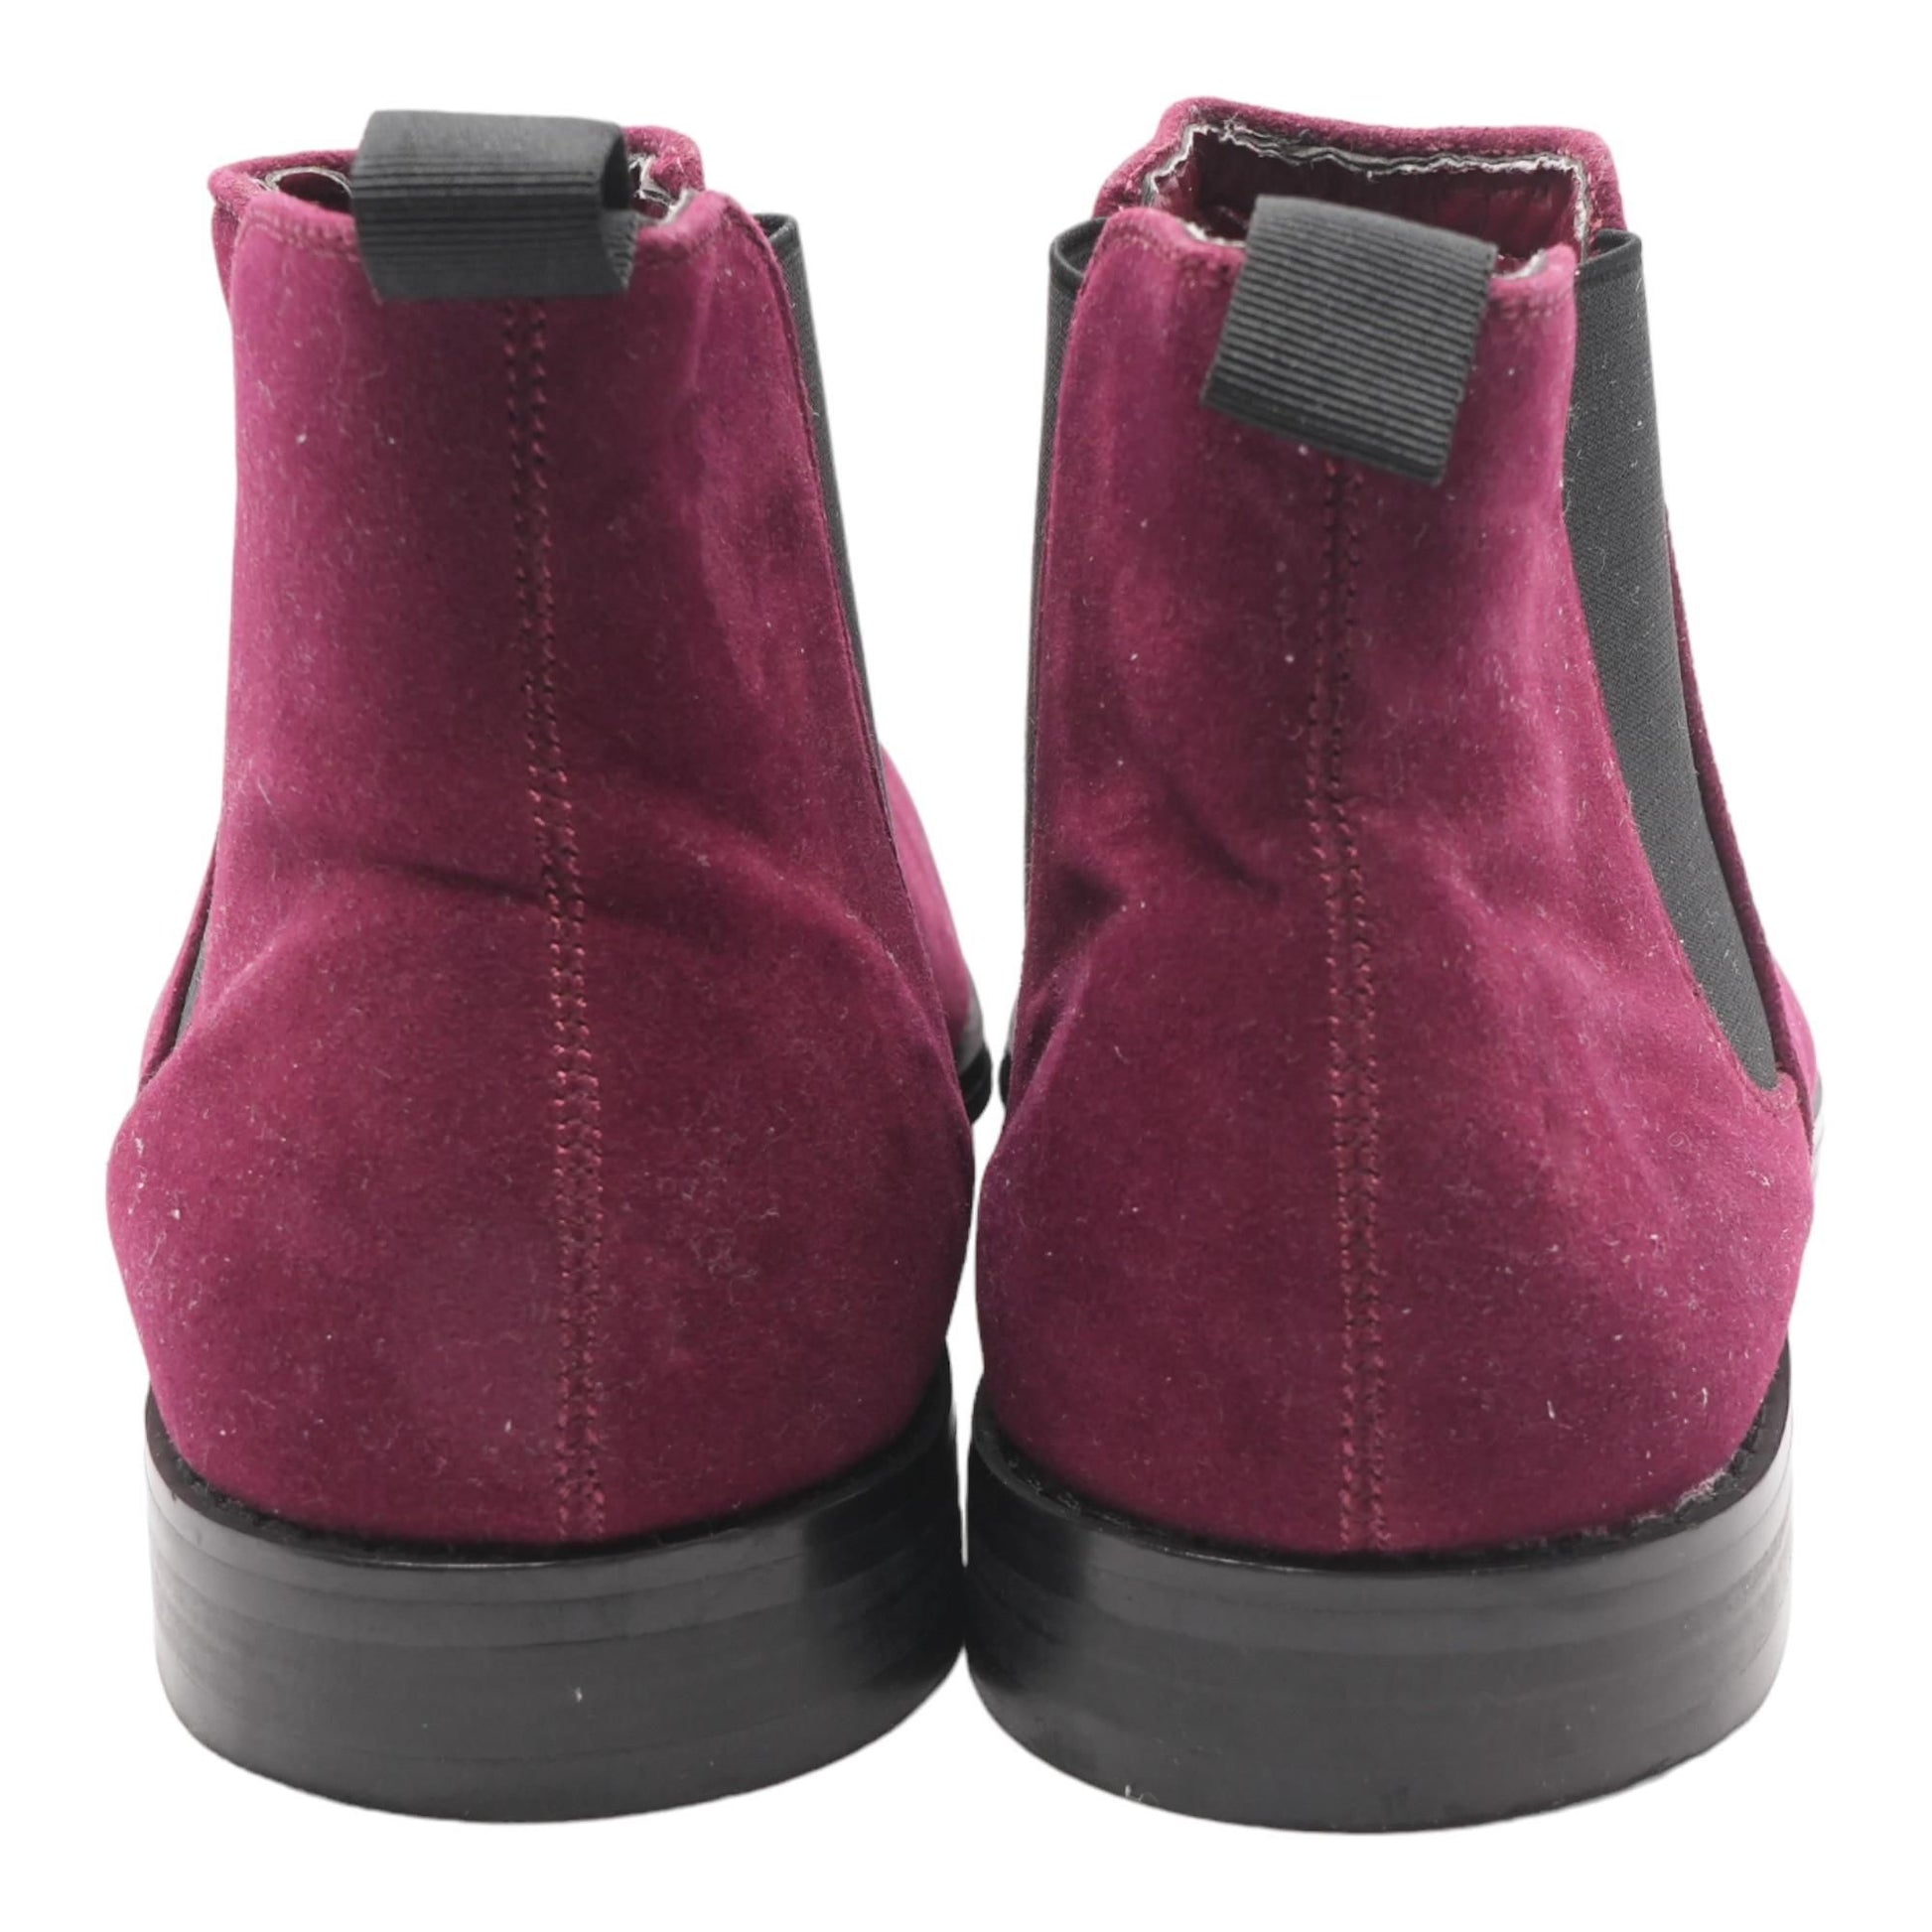 Burgundy Leather Chelsea Boots – Unclaimed Baggage